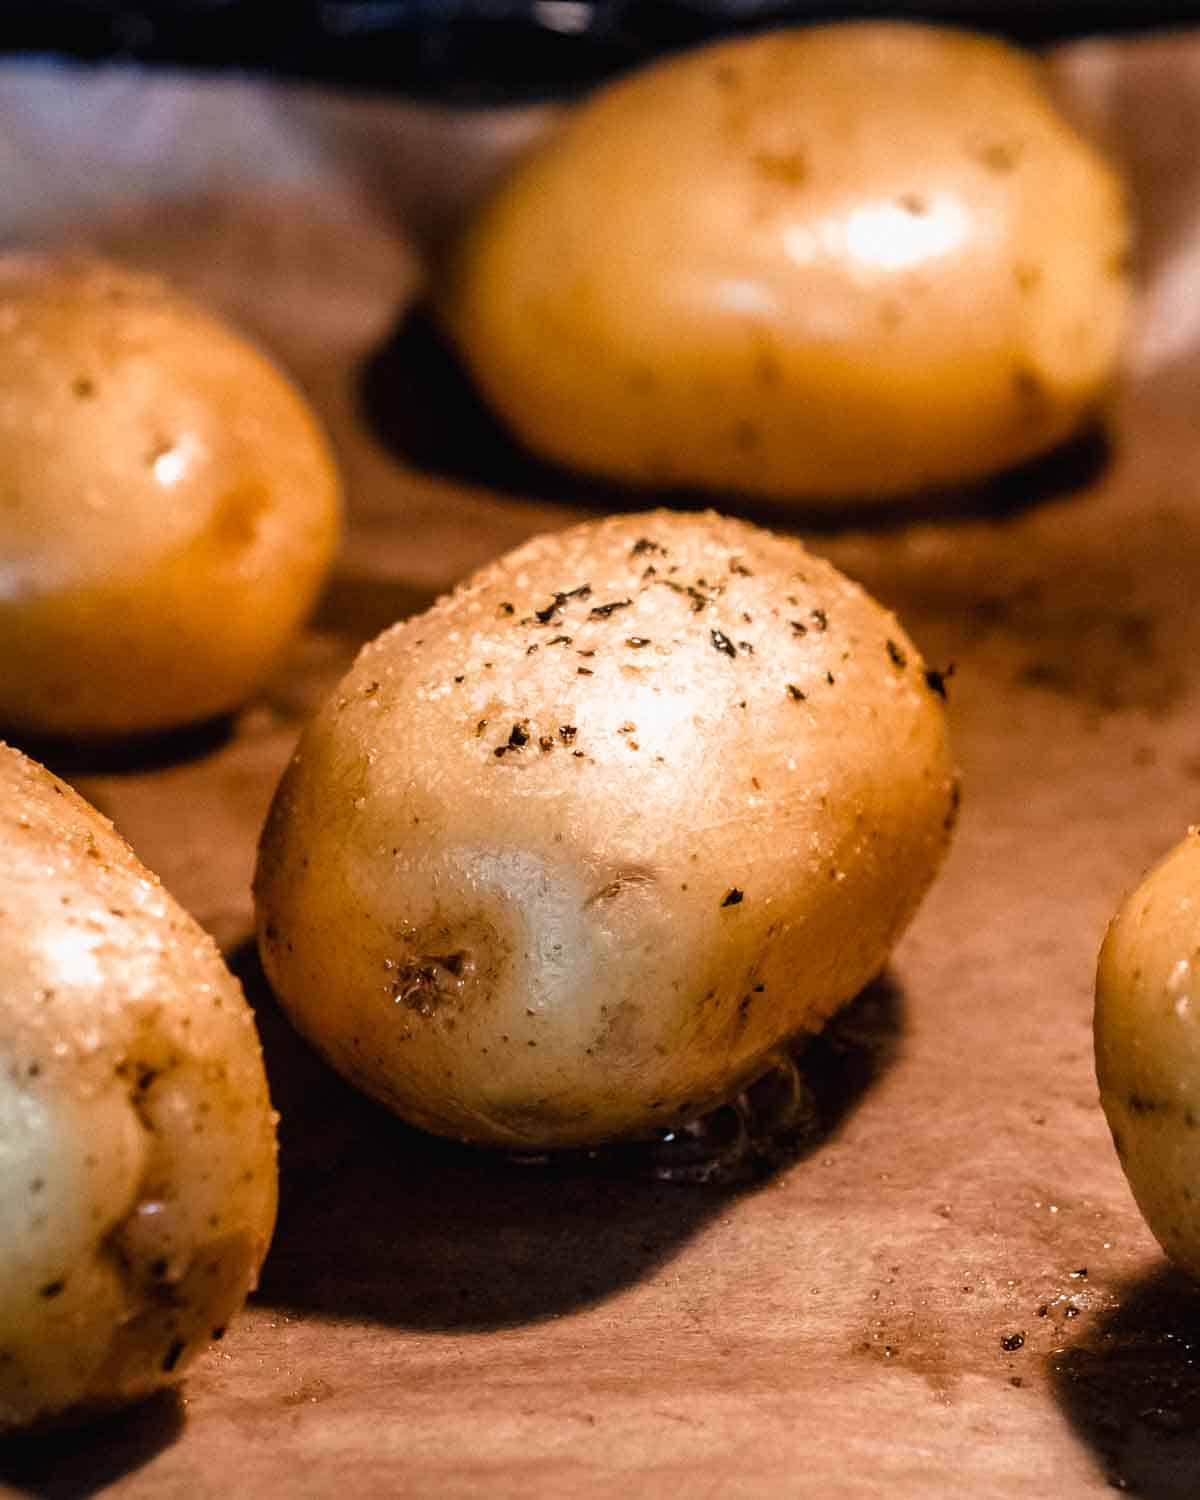 baked potatoes without foil in the oven.